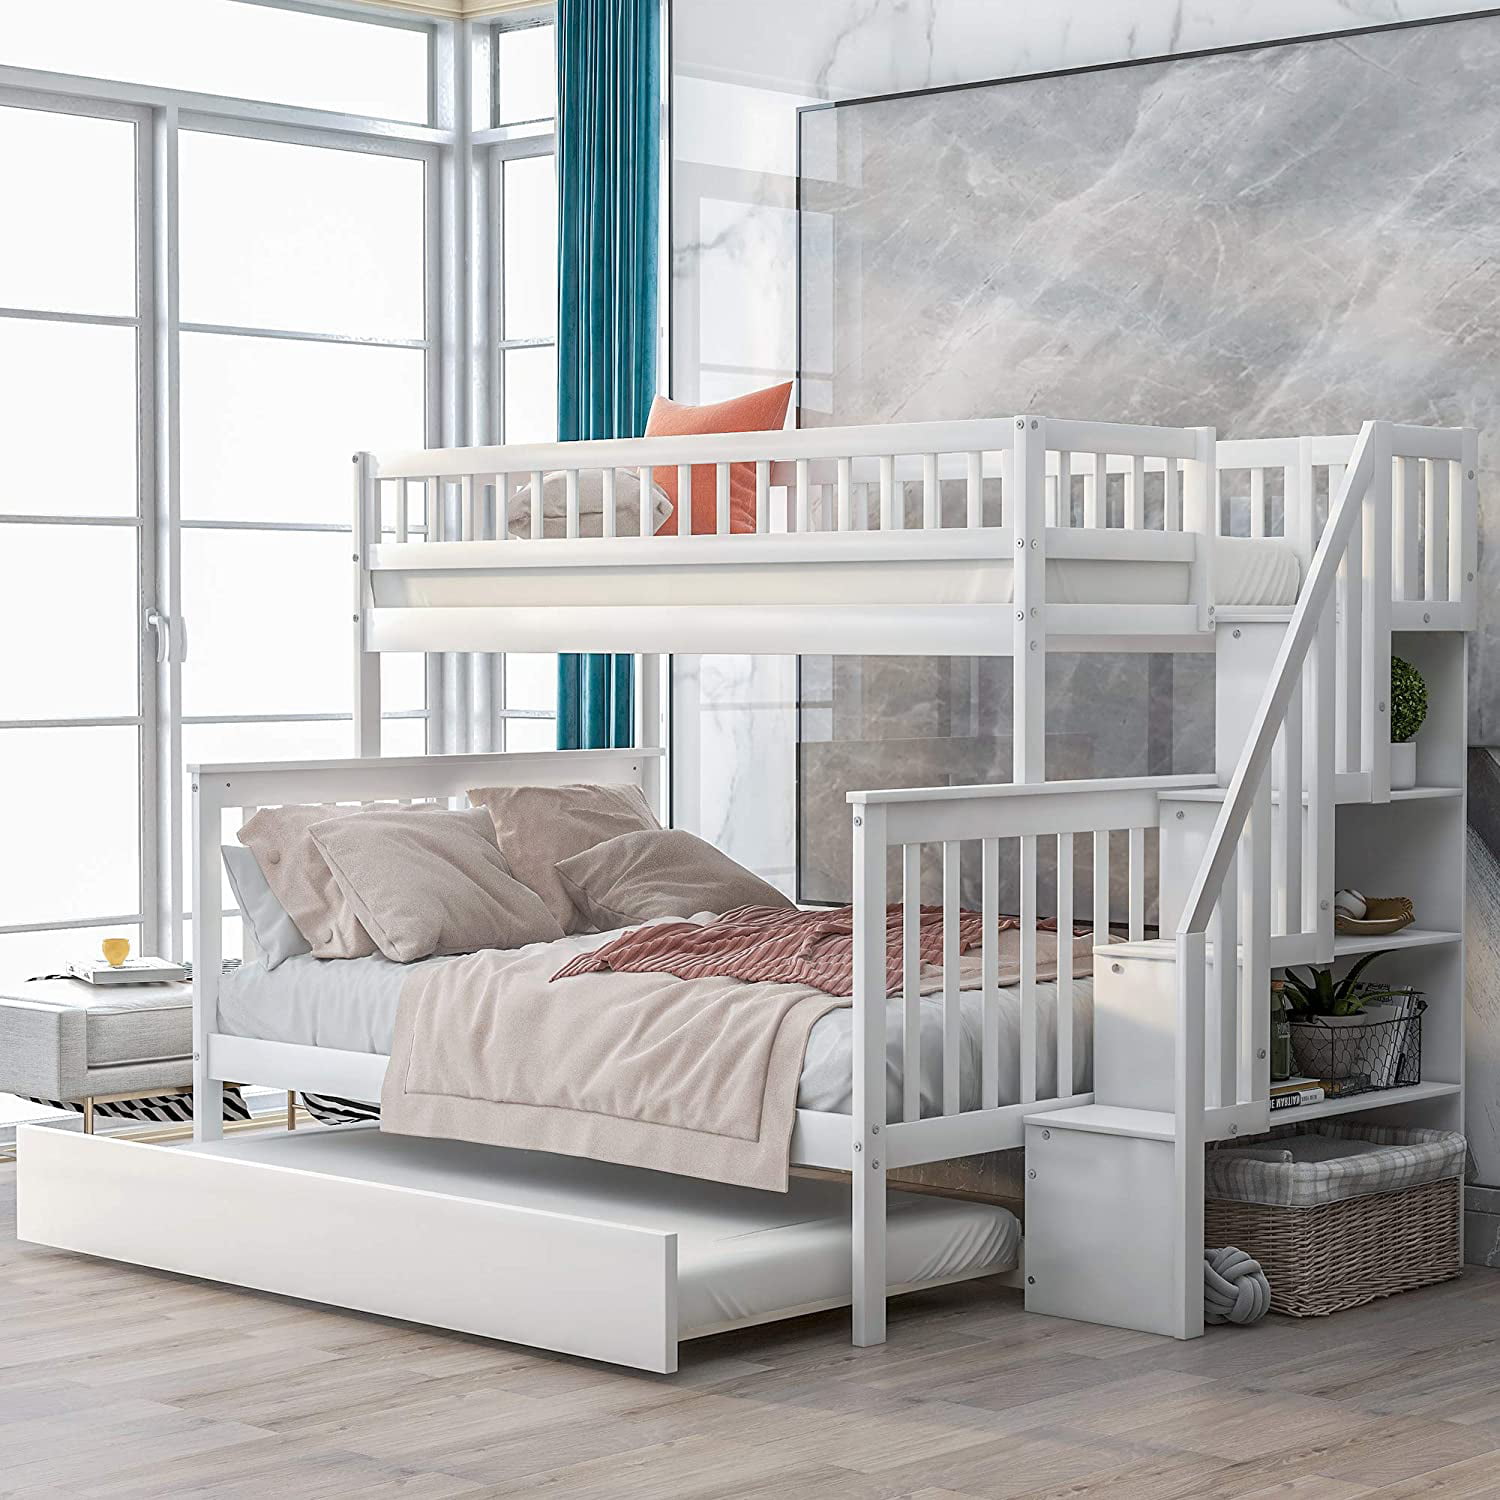 Piscis Bunk Bed Beds Twin Over, Wooden Bunk Beds Twin Over Full With Trundle